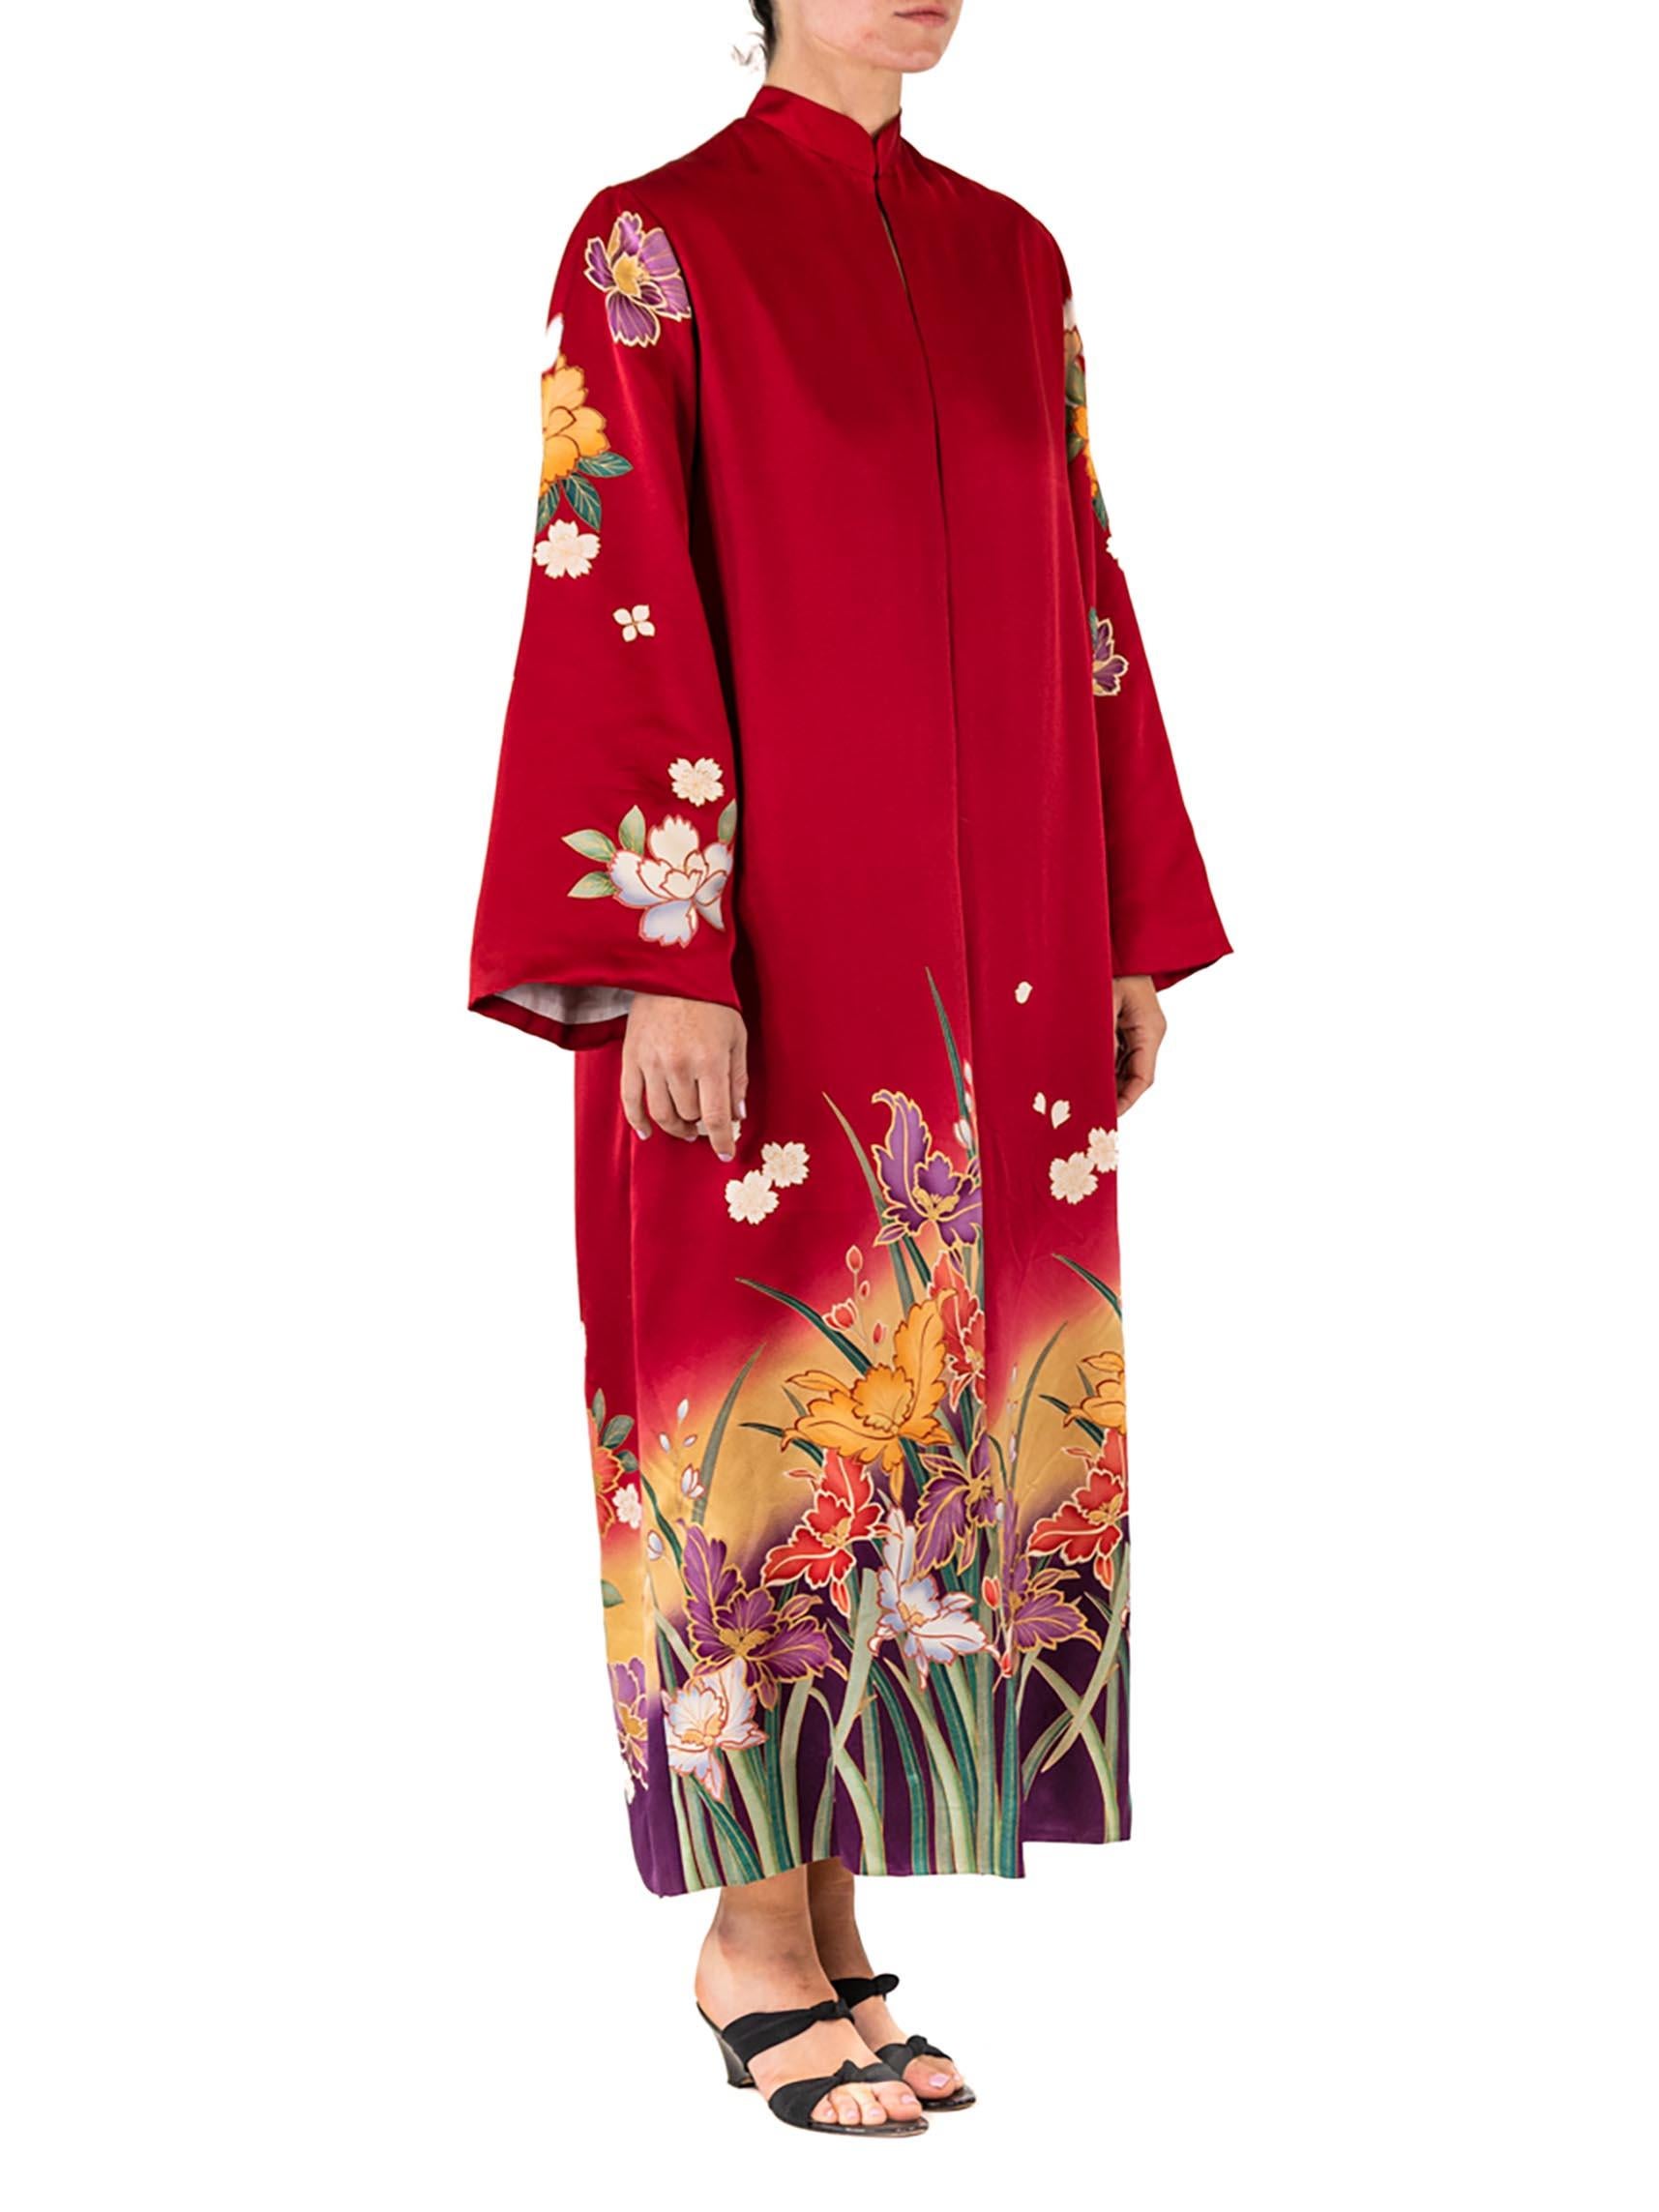 MORPHEW COLLECTION Red Floral Japanese Kimono Silk Duster For Sale 2